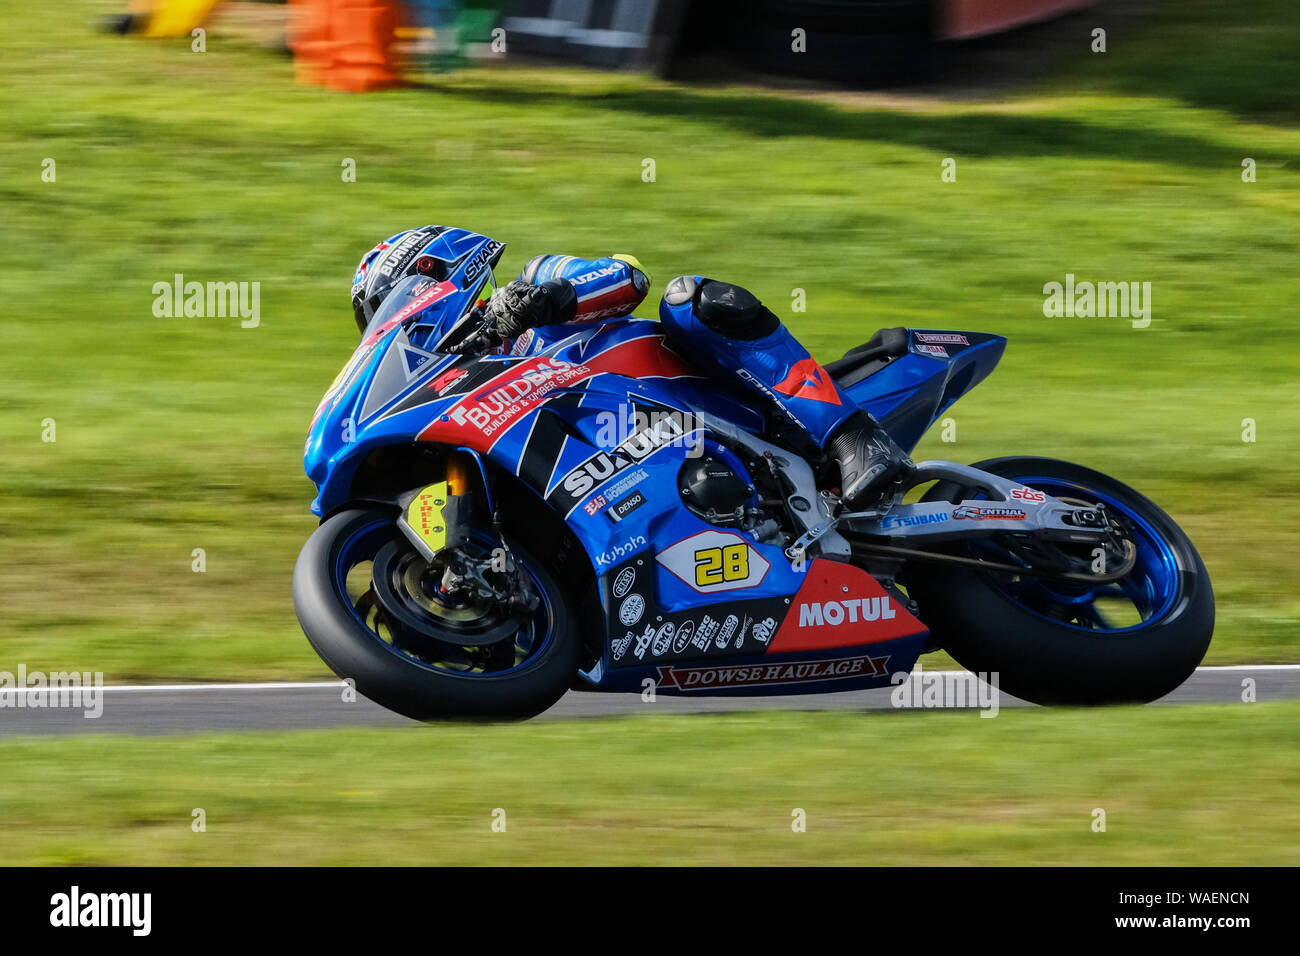 Bradley Ray on the Buildbase Suzuki GSX-R 1000 at BSB Cadwell Park 2019 Stock Photo